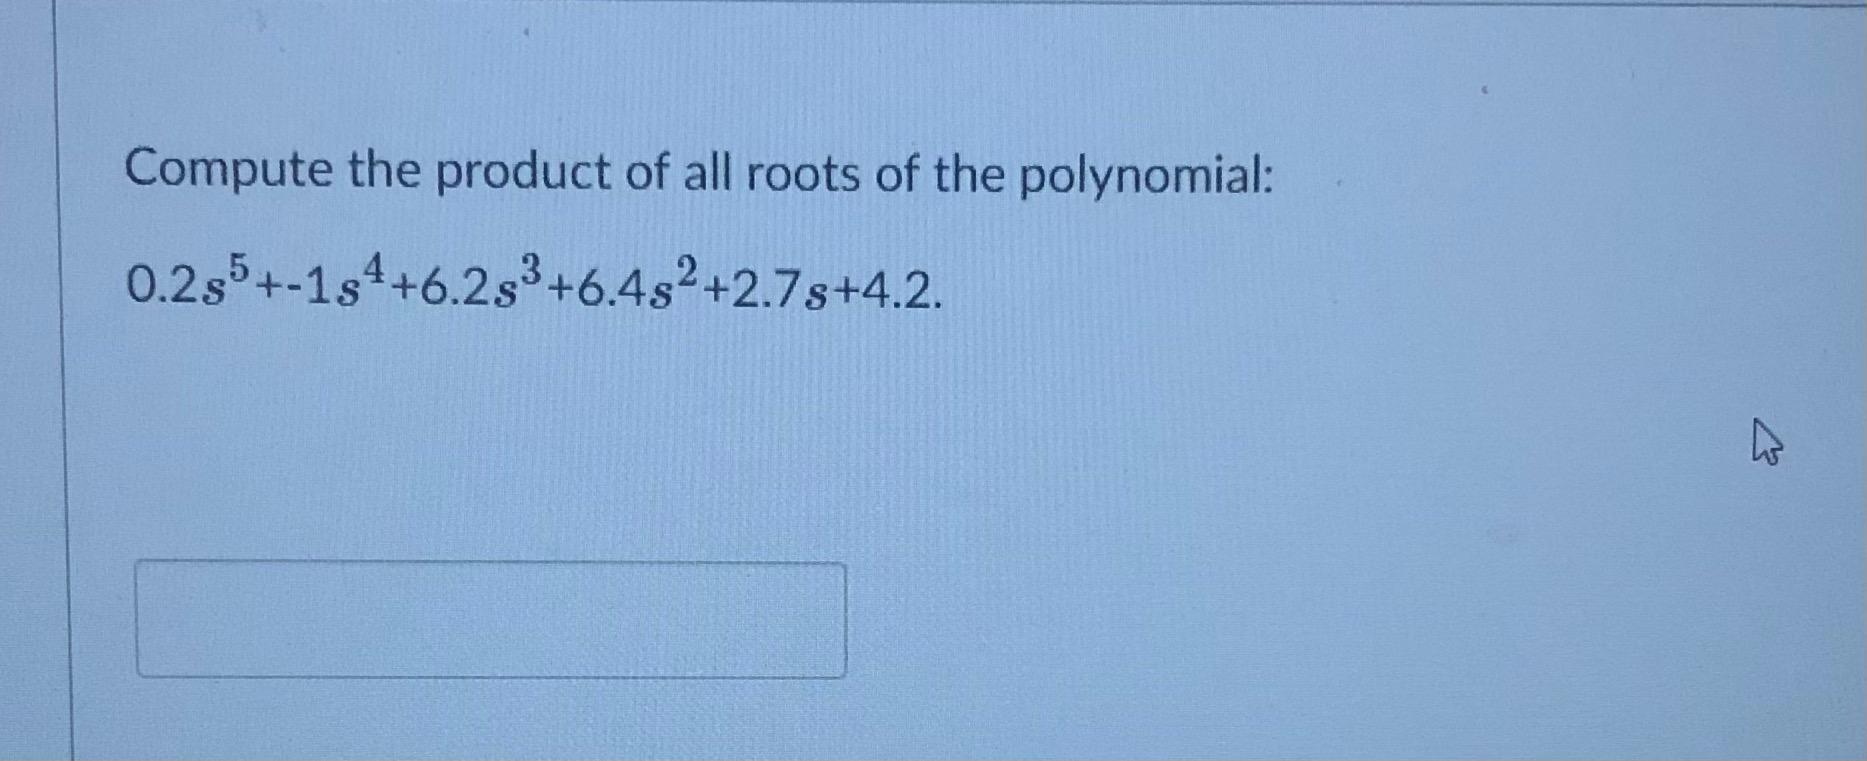 Compute The Product Of All Roots Of The Polynomial 0 255 194 6 283 6 482 2 75 4 2 4 1